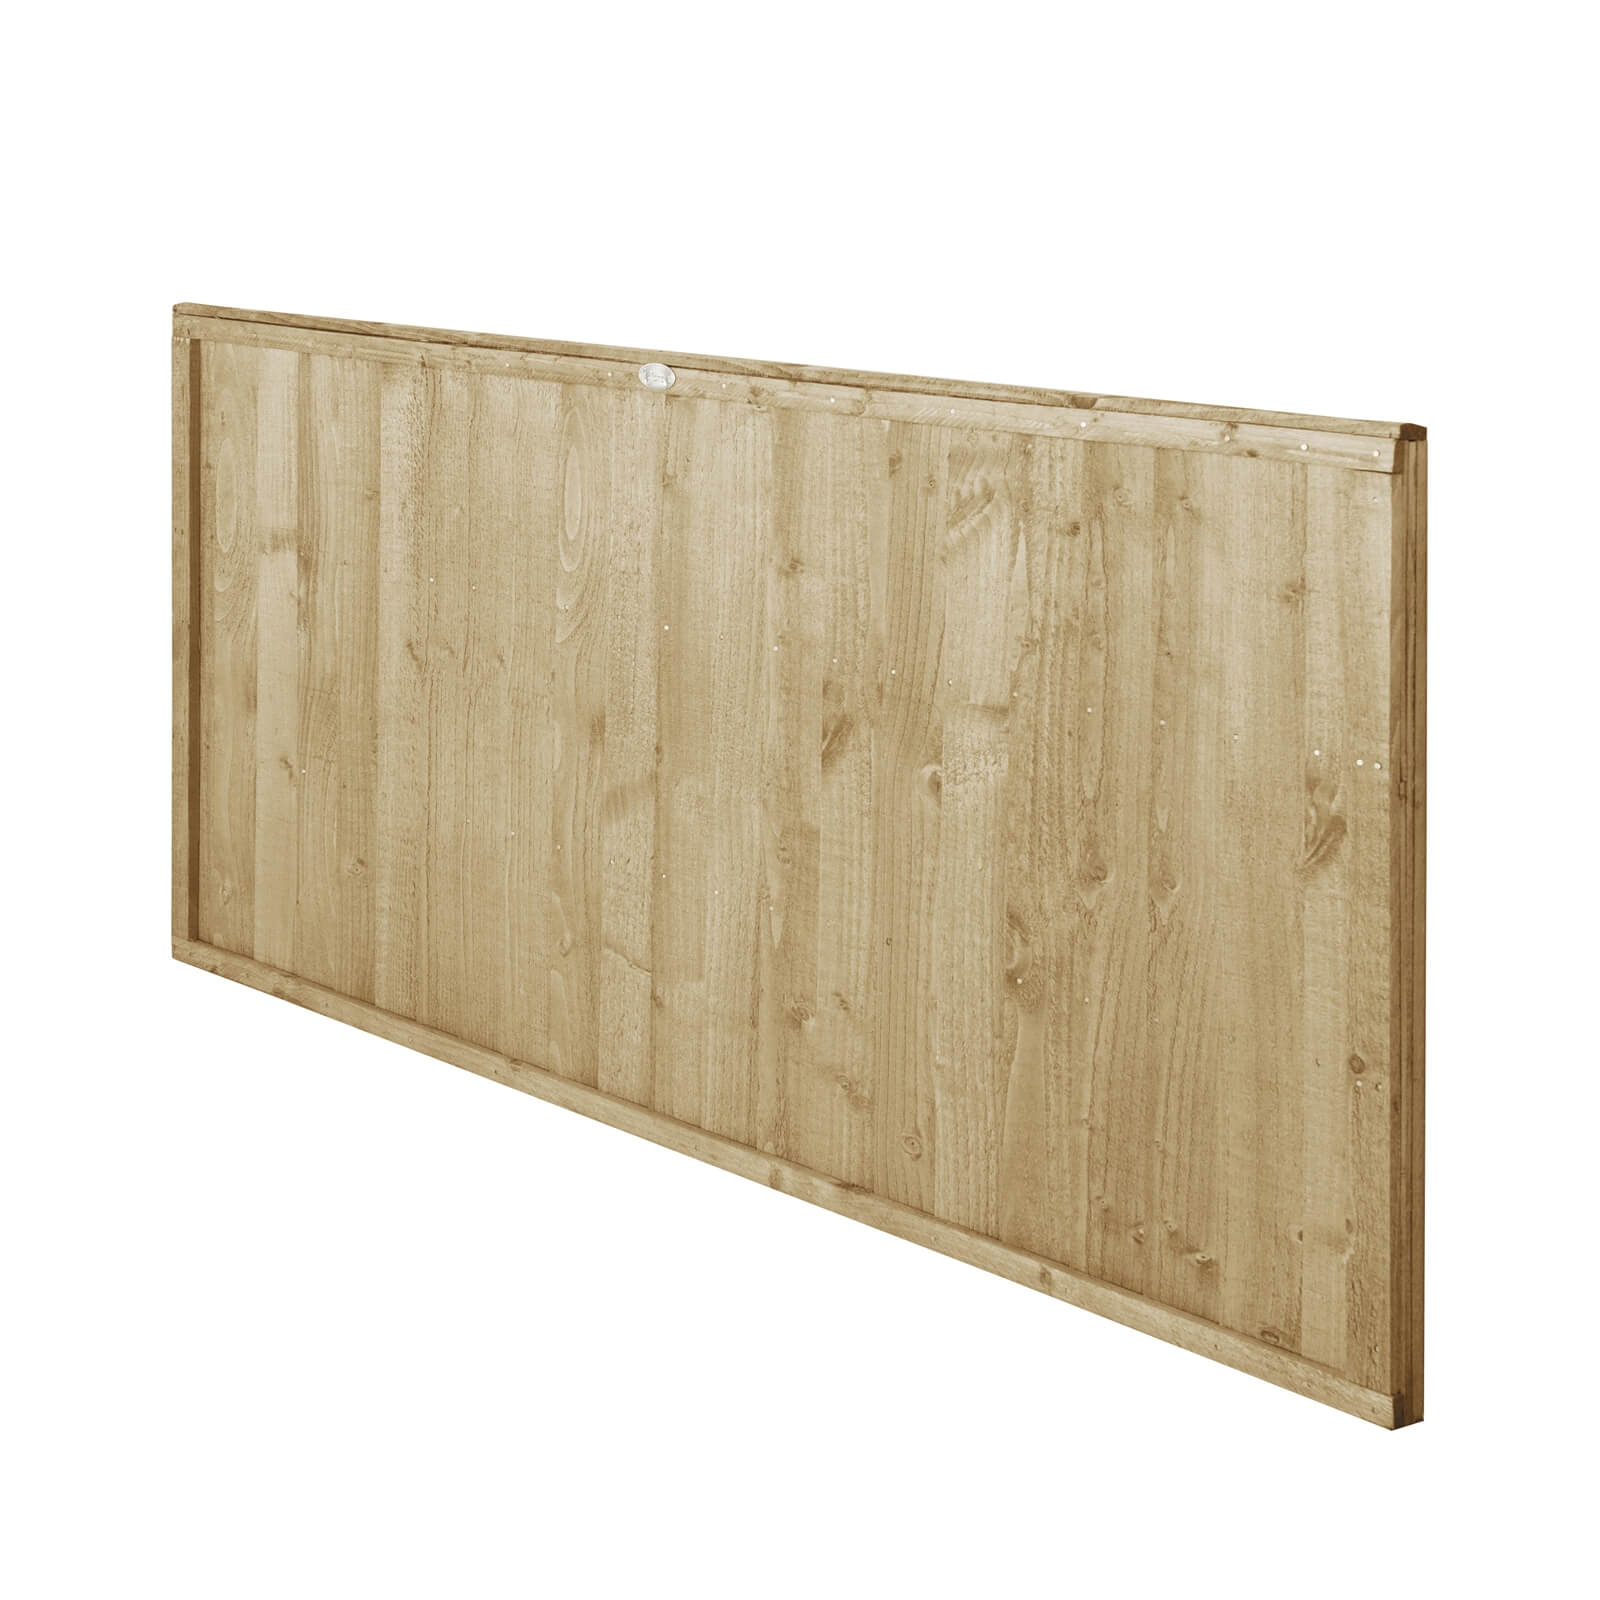 6ft x 3ft (1.83m x 0.91m) Pressure Treated Closeboard Fence Panel - Pack of 5